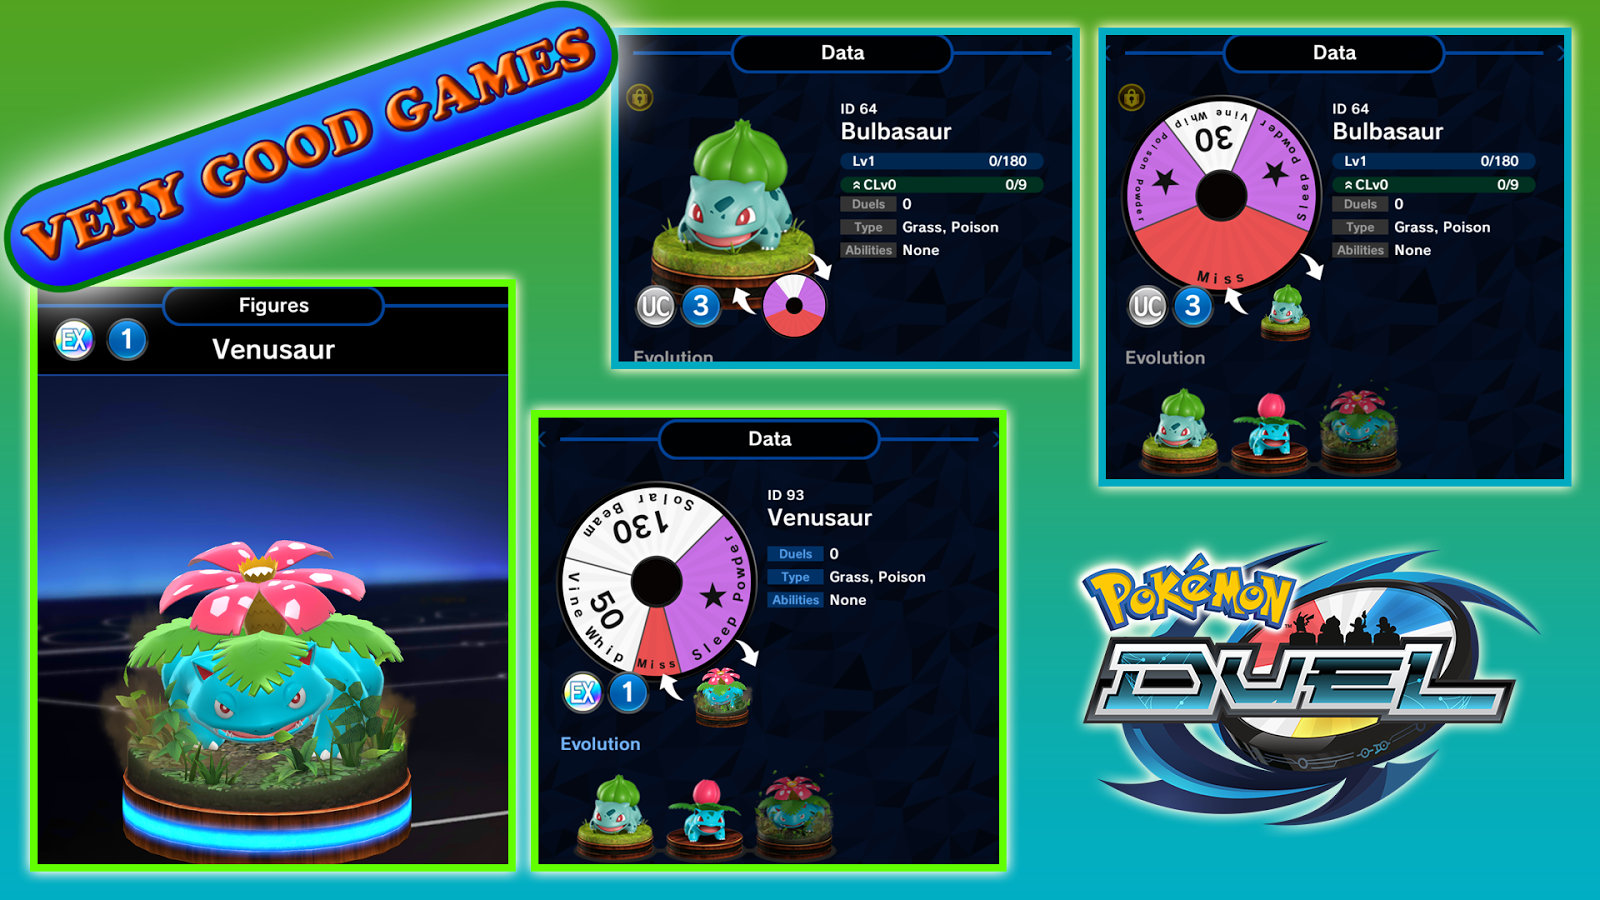 Tutorial Pokemon Duel about figures - Bulbasaur and Venusaur with their data disks